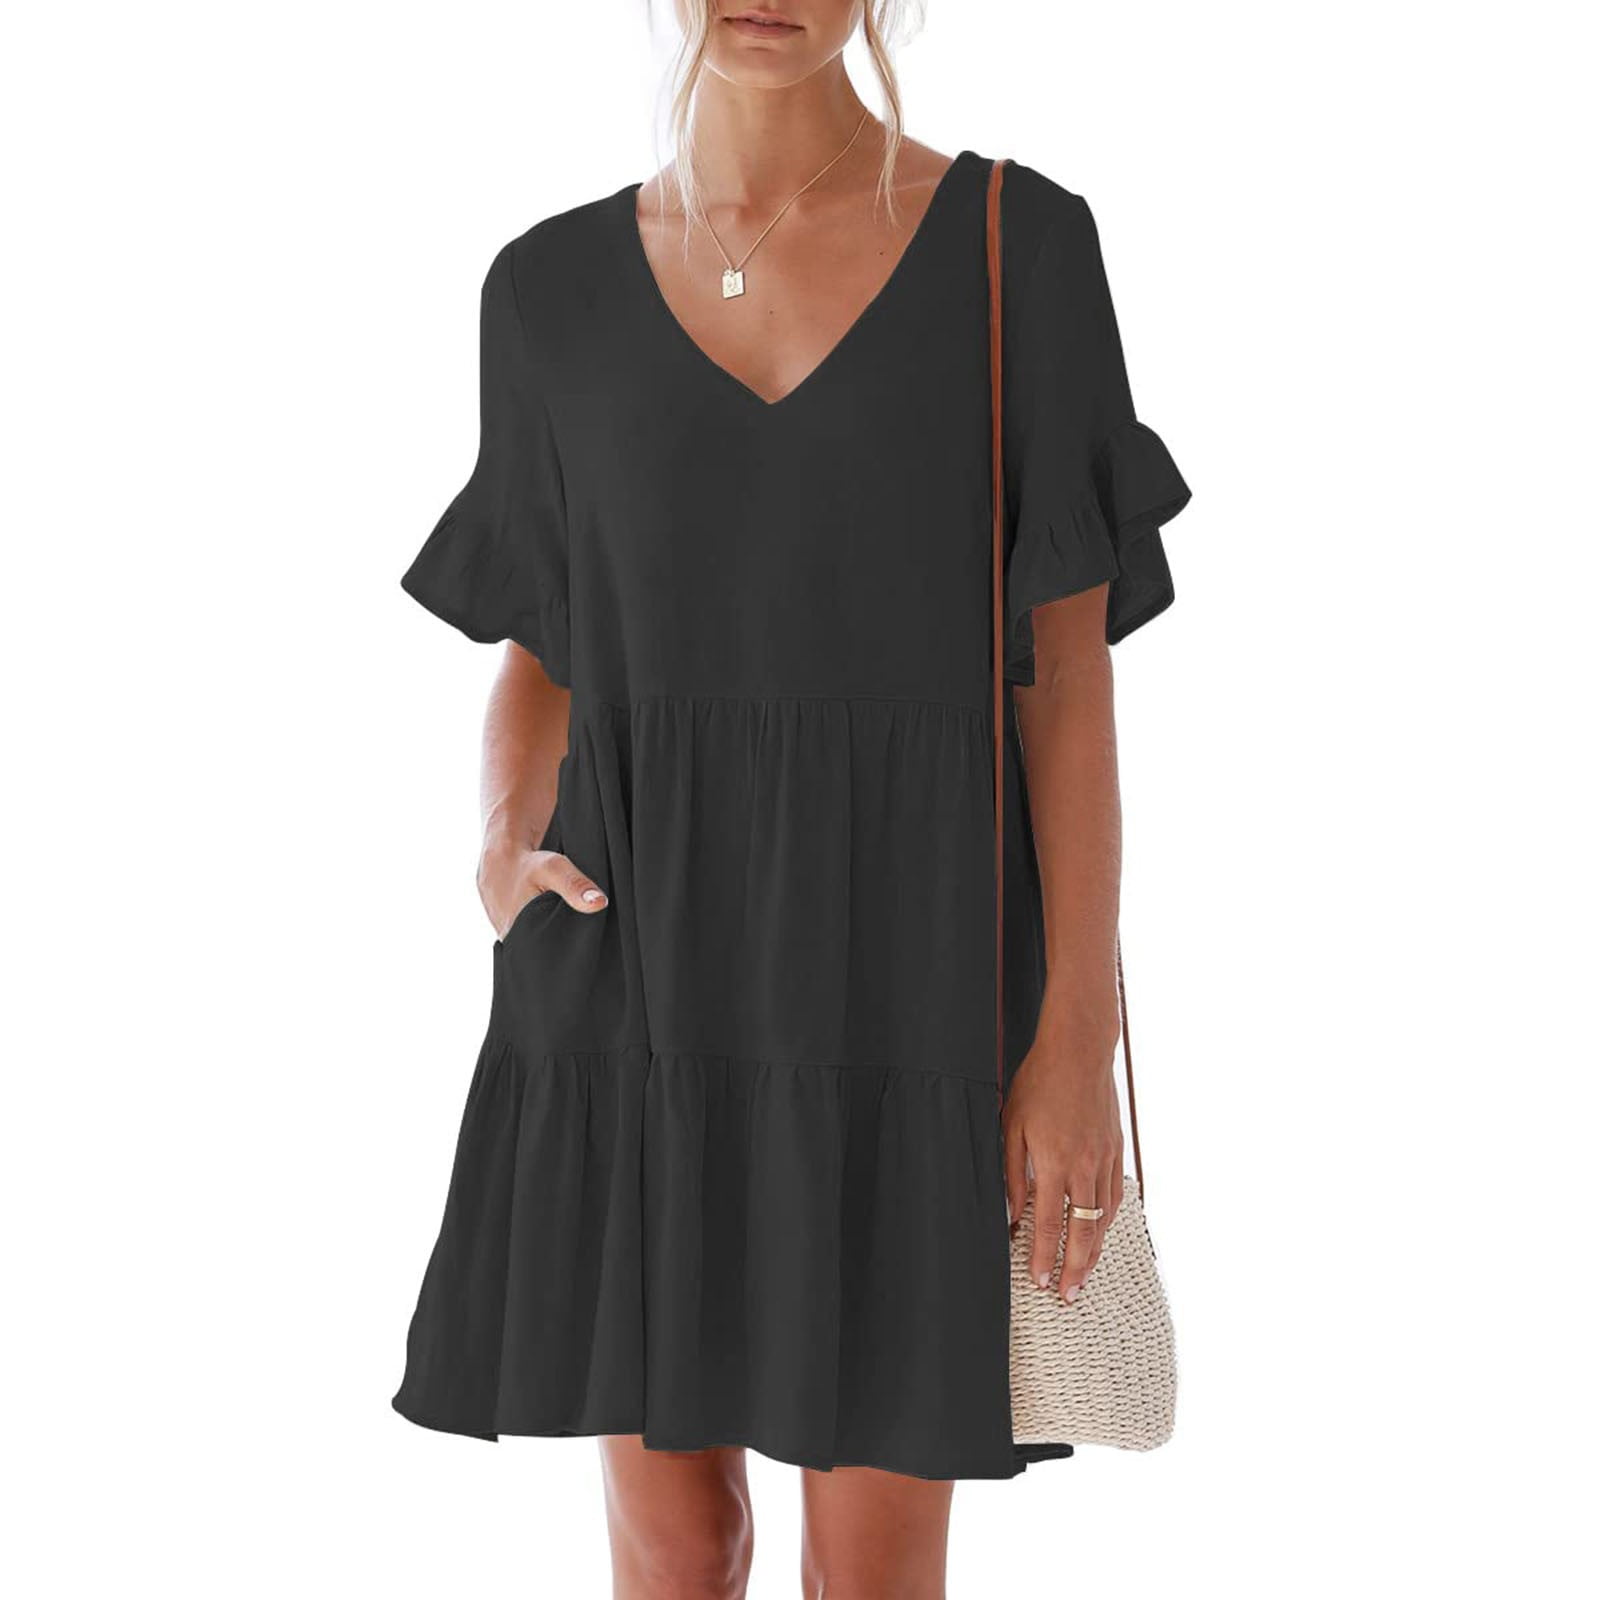 BEEYASO Clearance Summer Dresses for Women Short Sleeve Solid